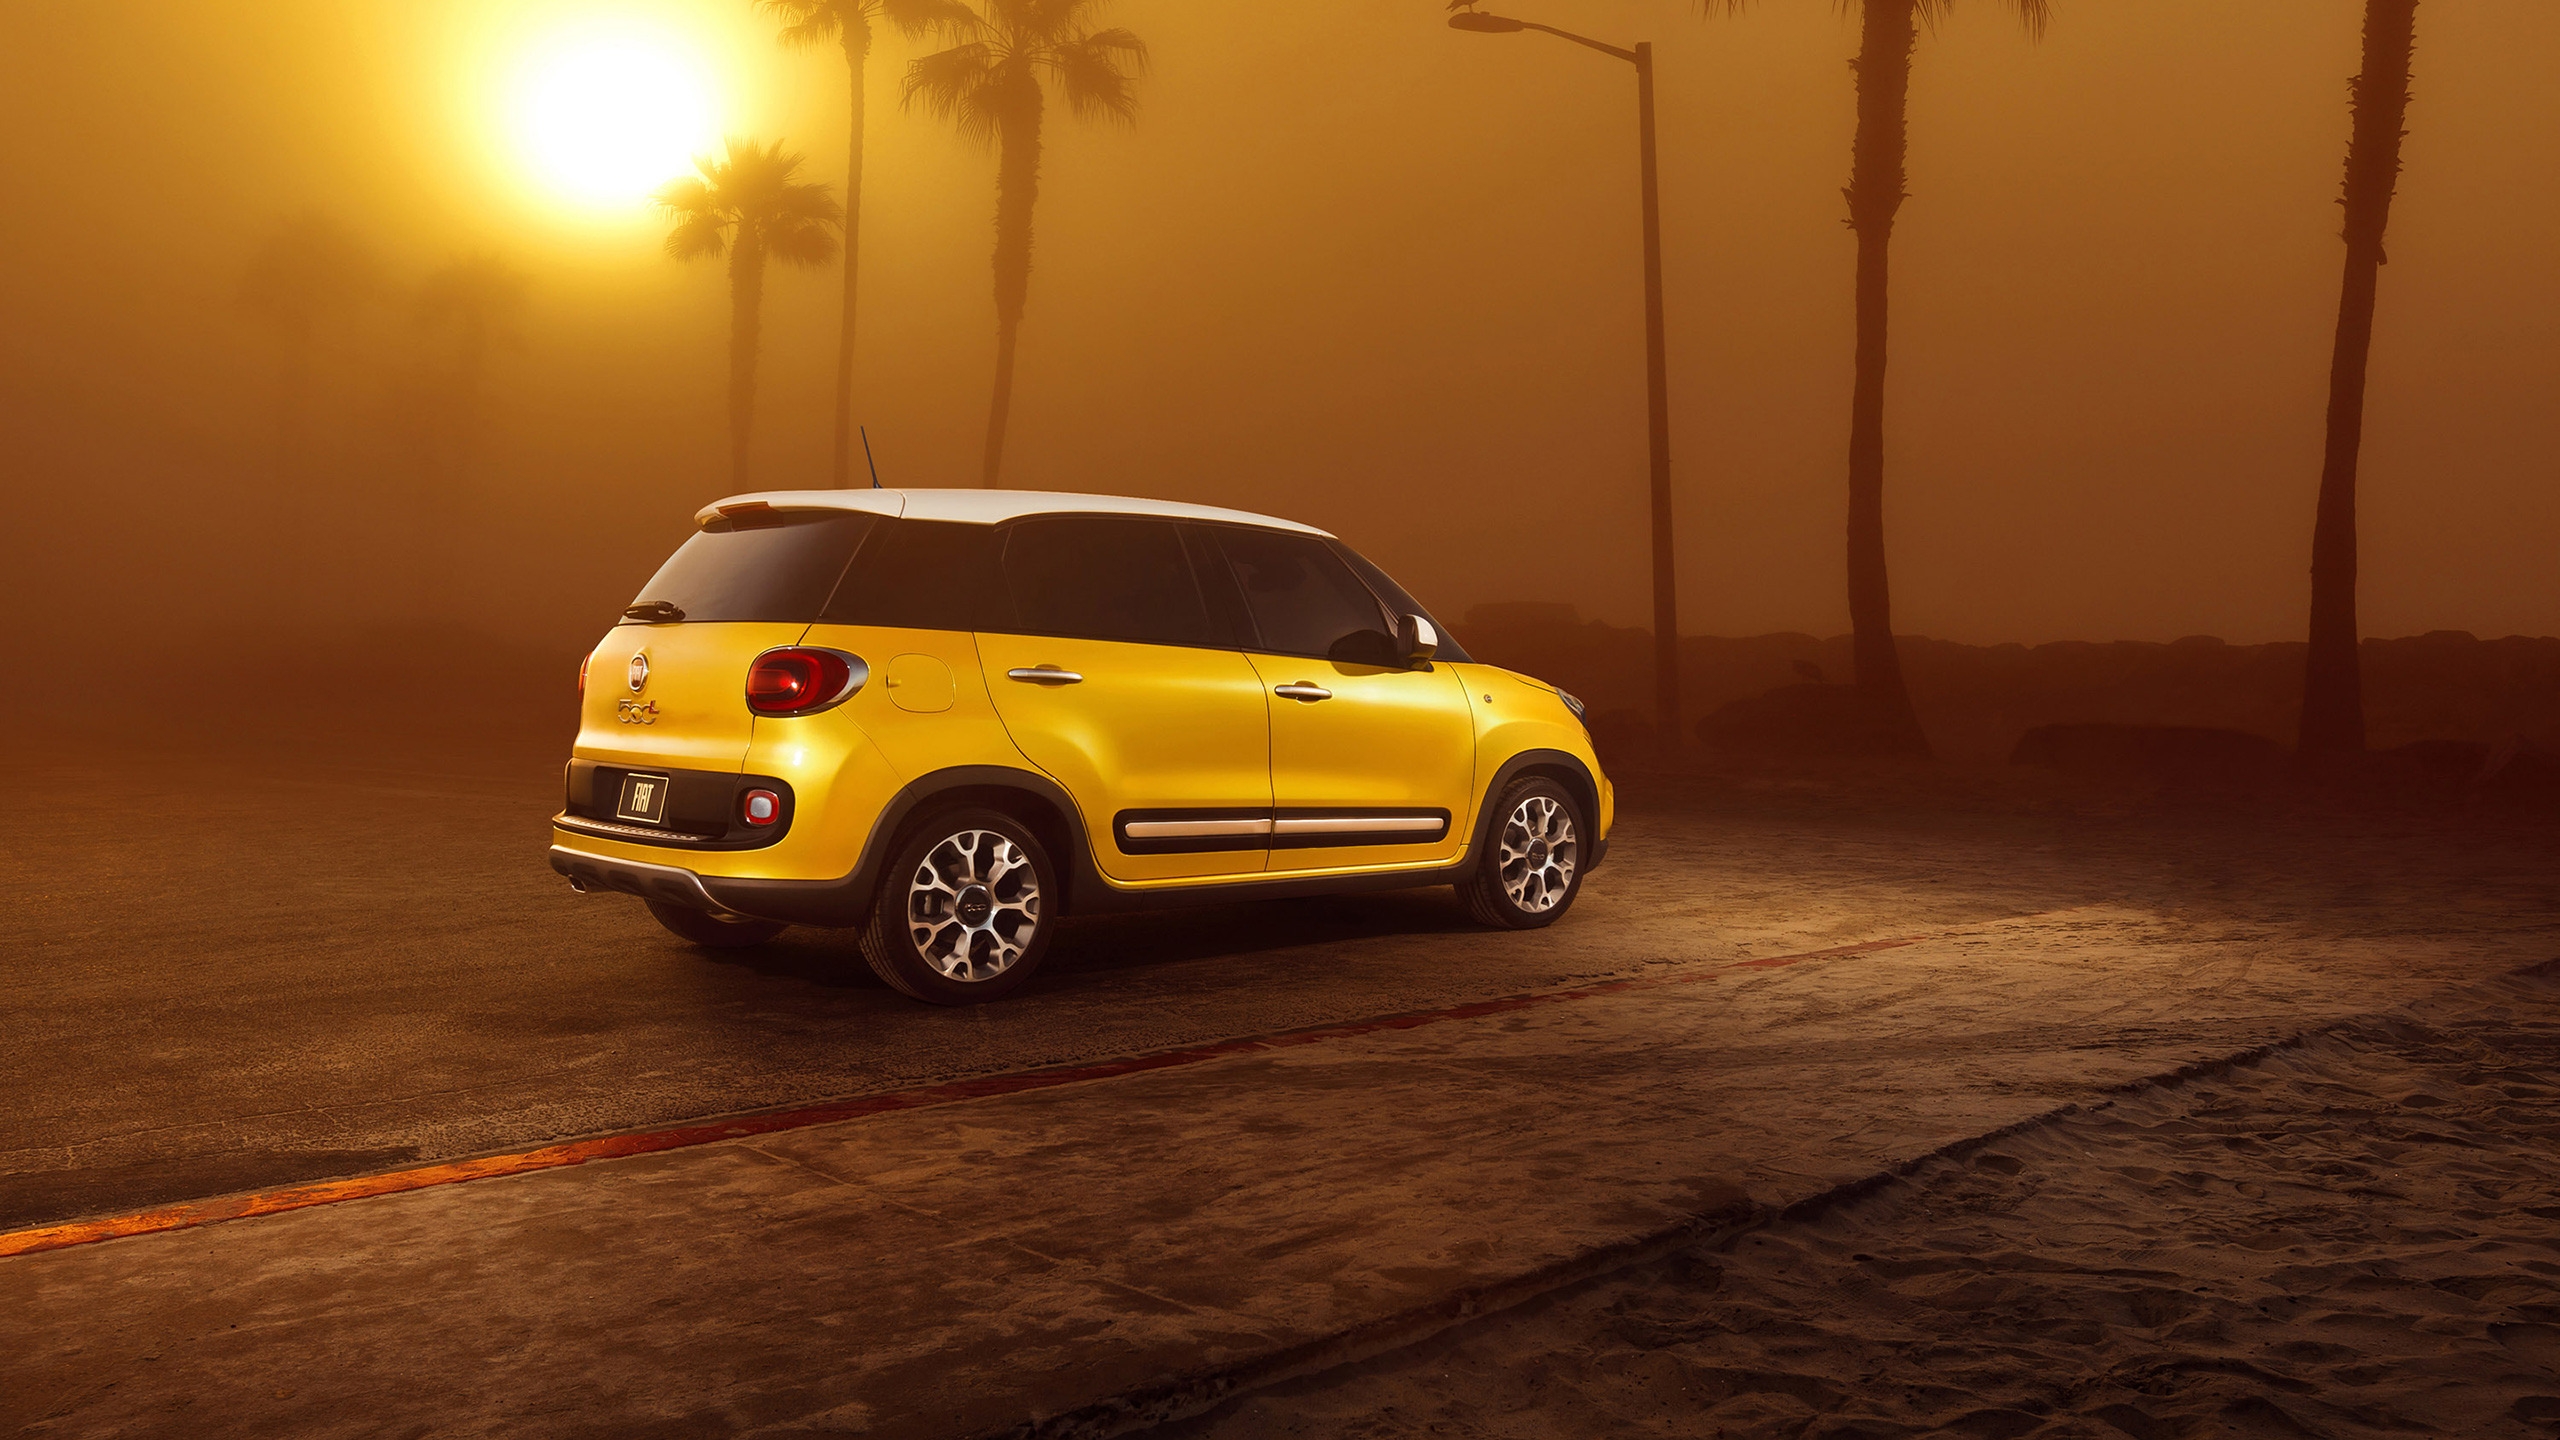 Sunset and Fiat 500L for 2560x1440 HDTV resolution